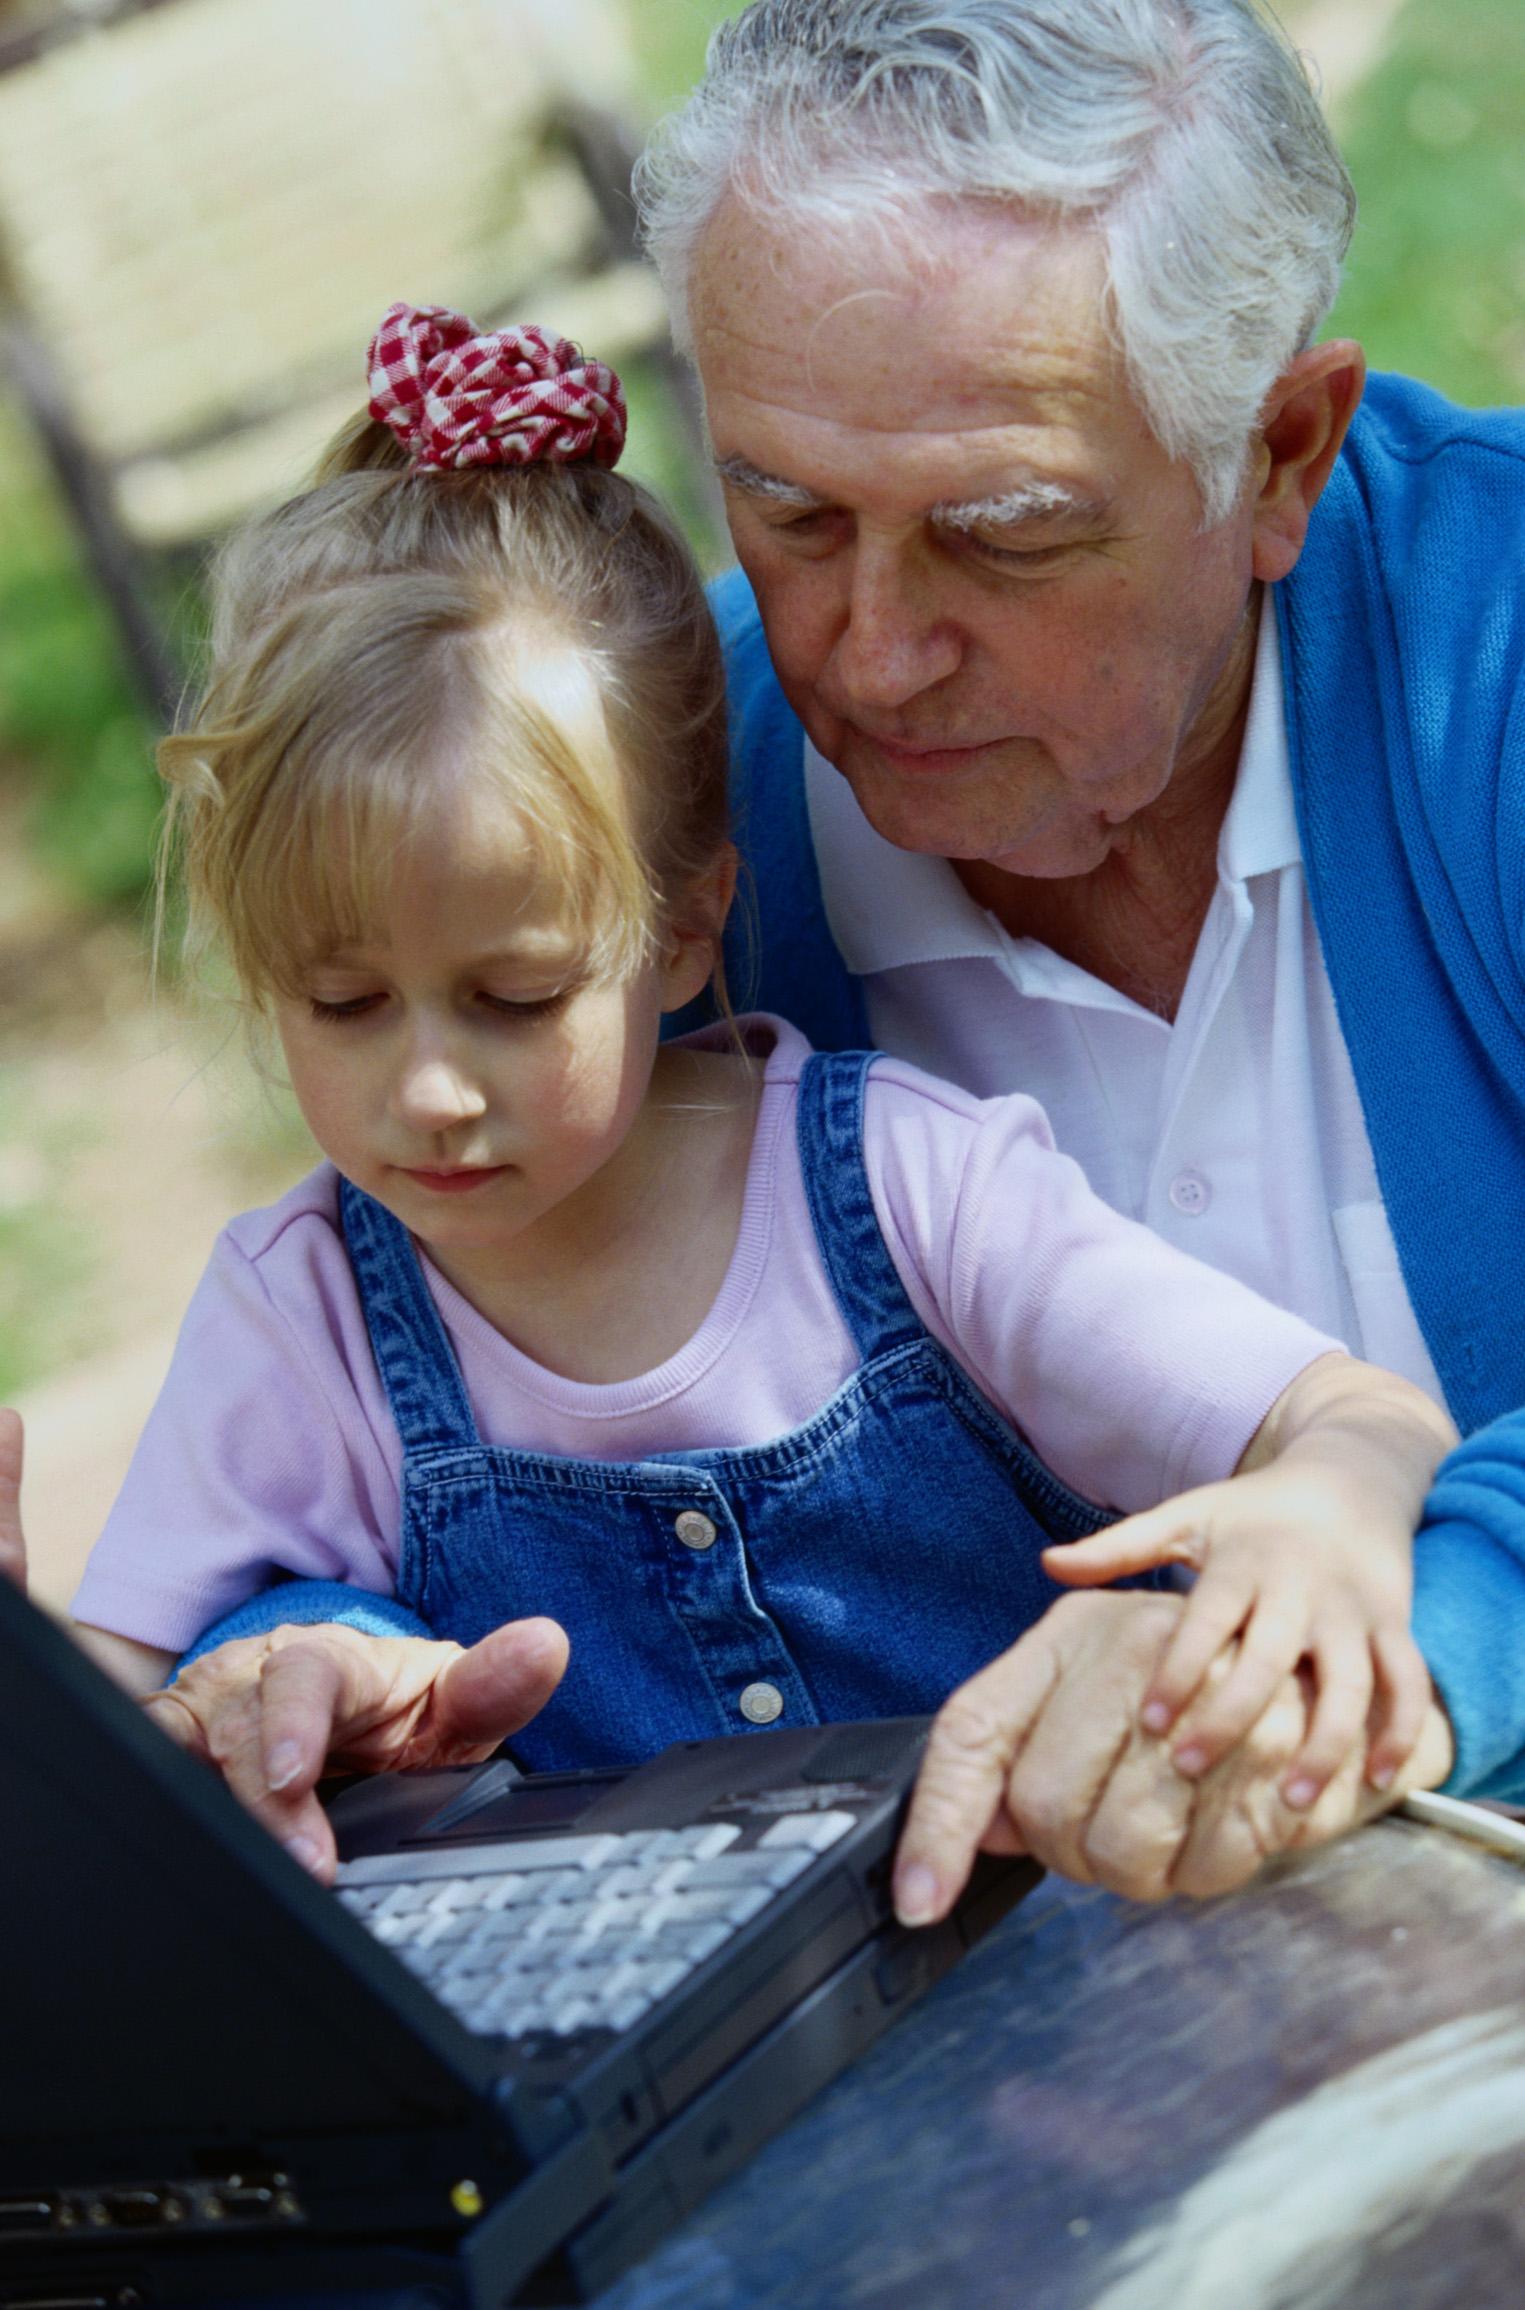 grandfather and granddaughter playing on a laptop